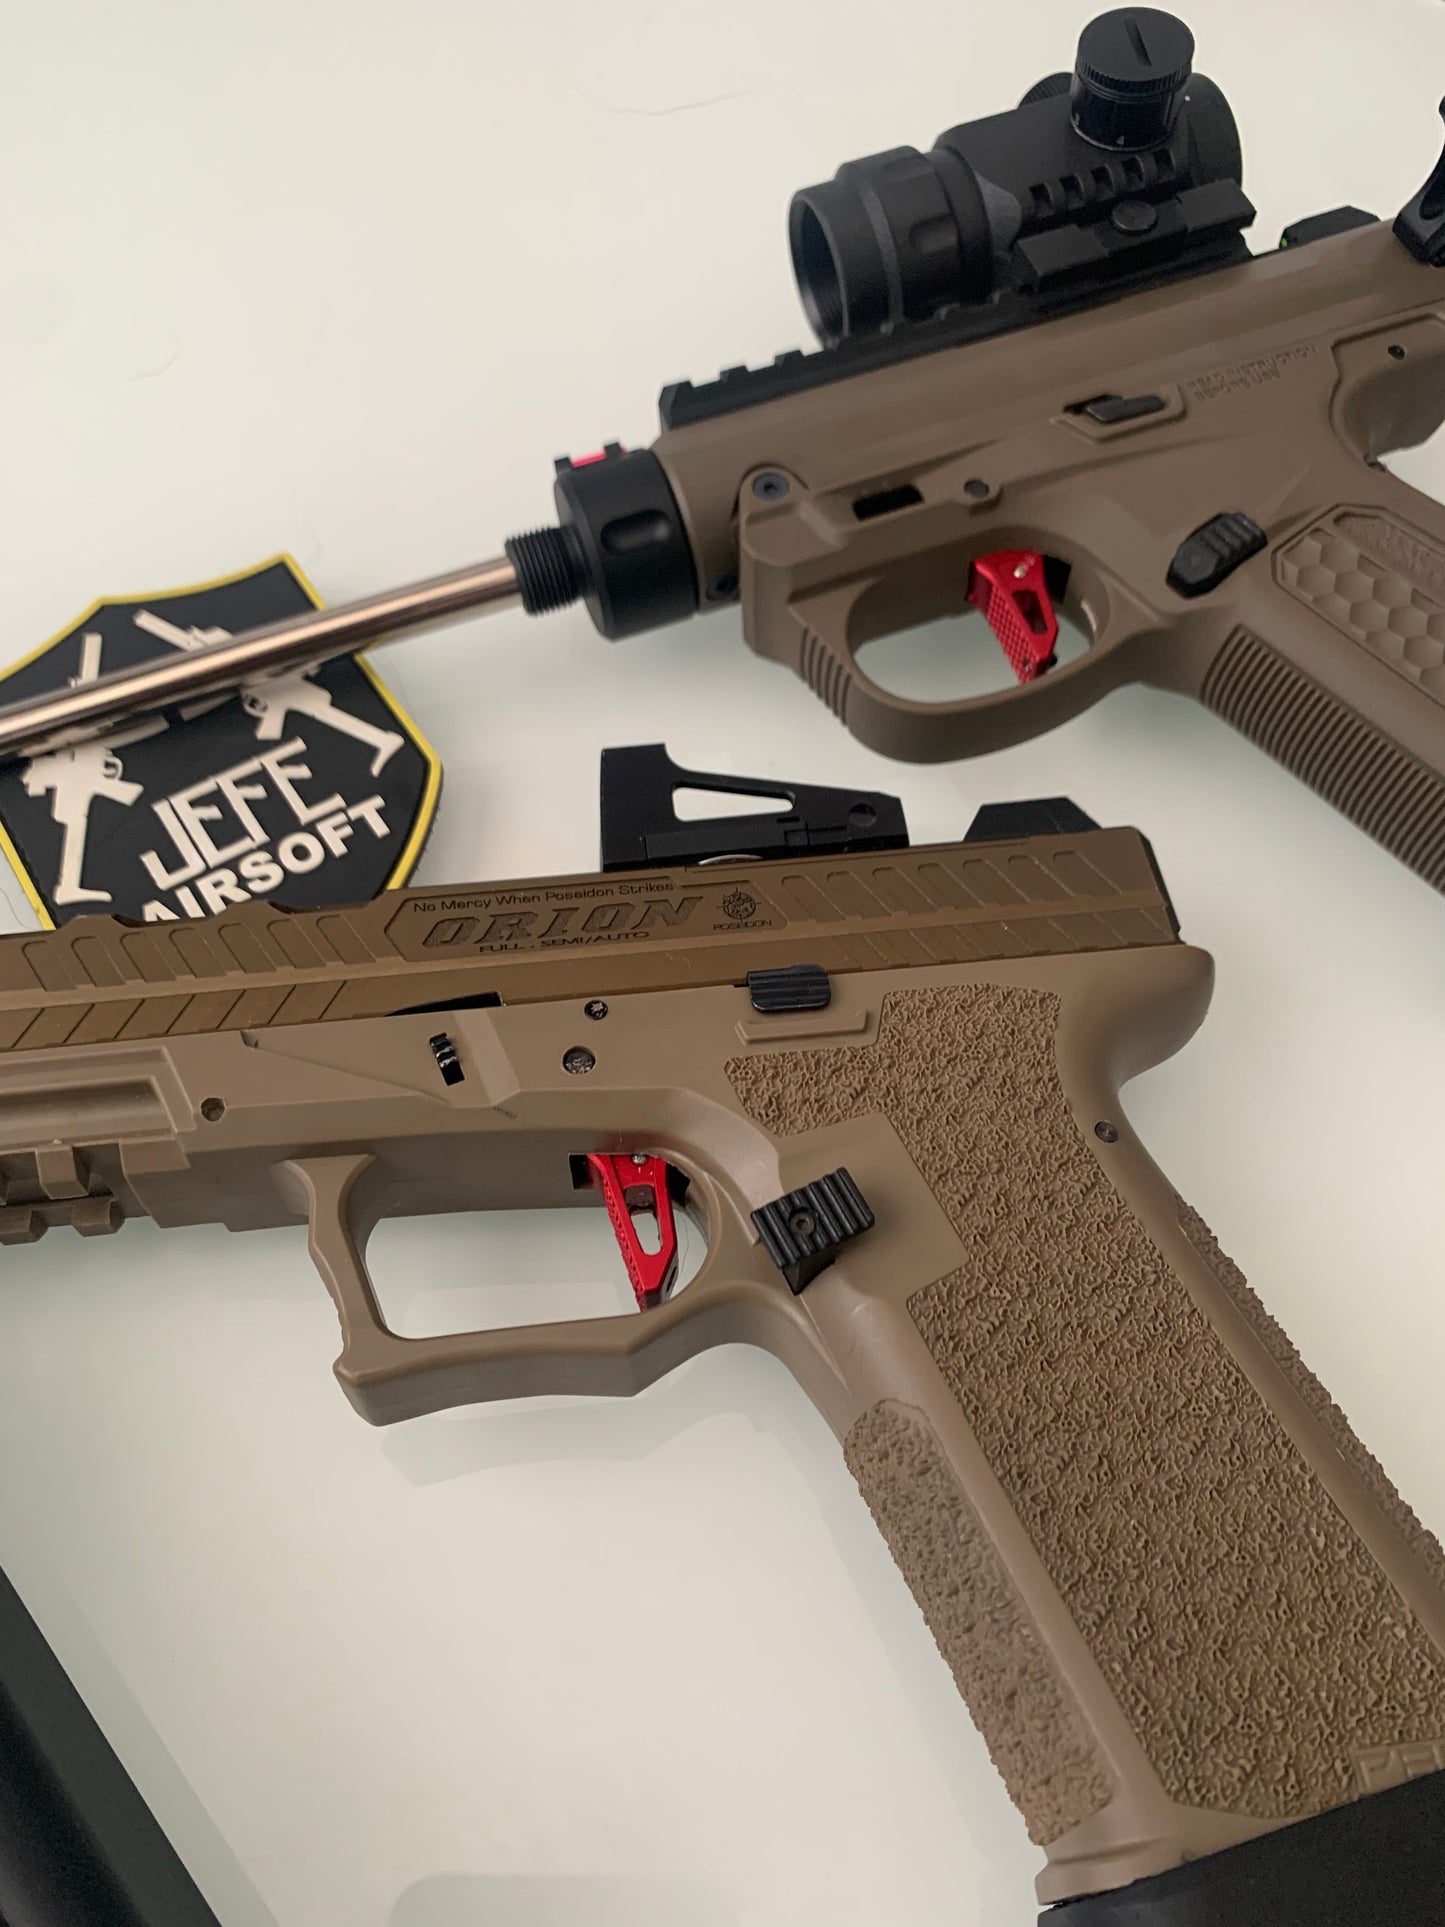 Adjustable Trigger - Glock and AAP01